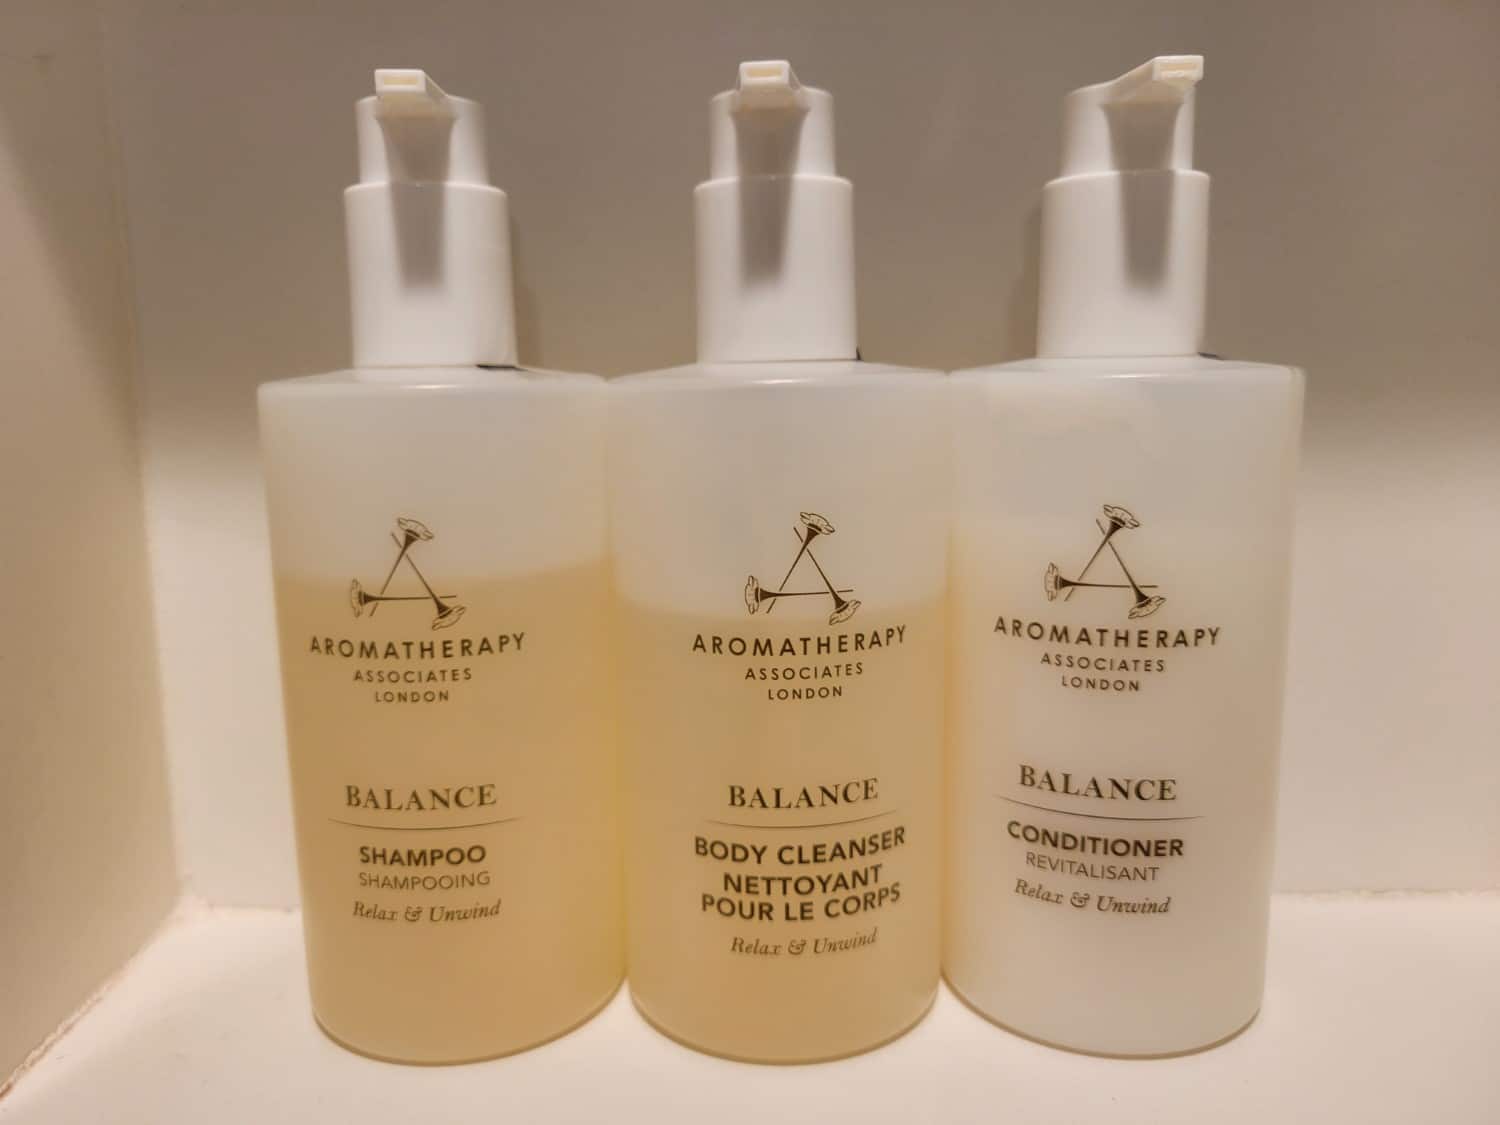 Aromatherapy Associates London shampoo, cleanser, and conditioner in the JW Marriott New Orleans hotel.